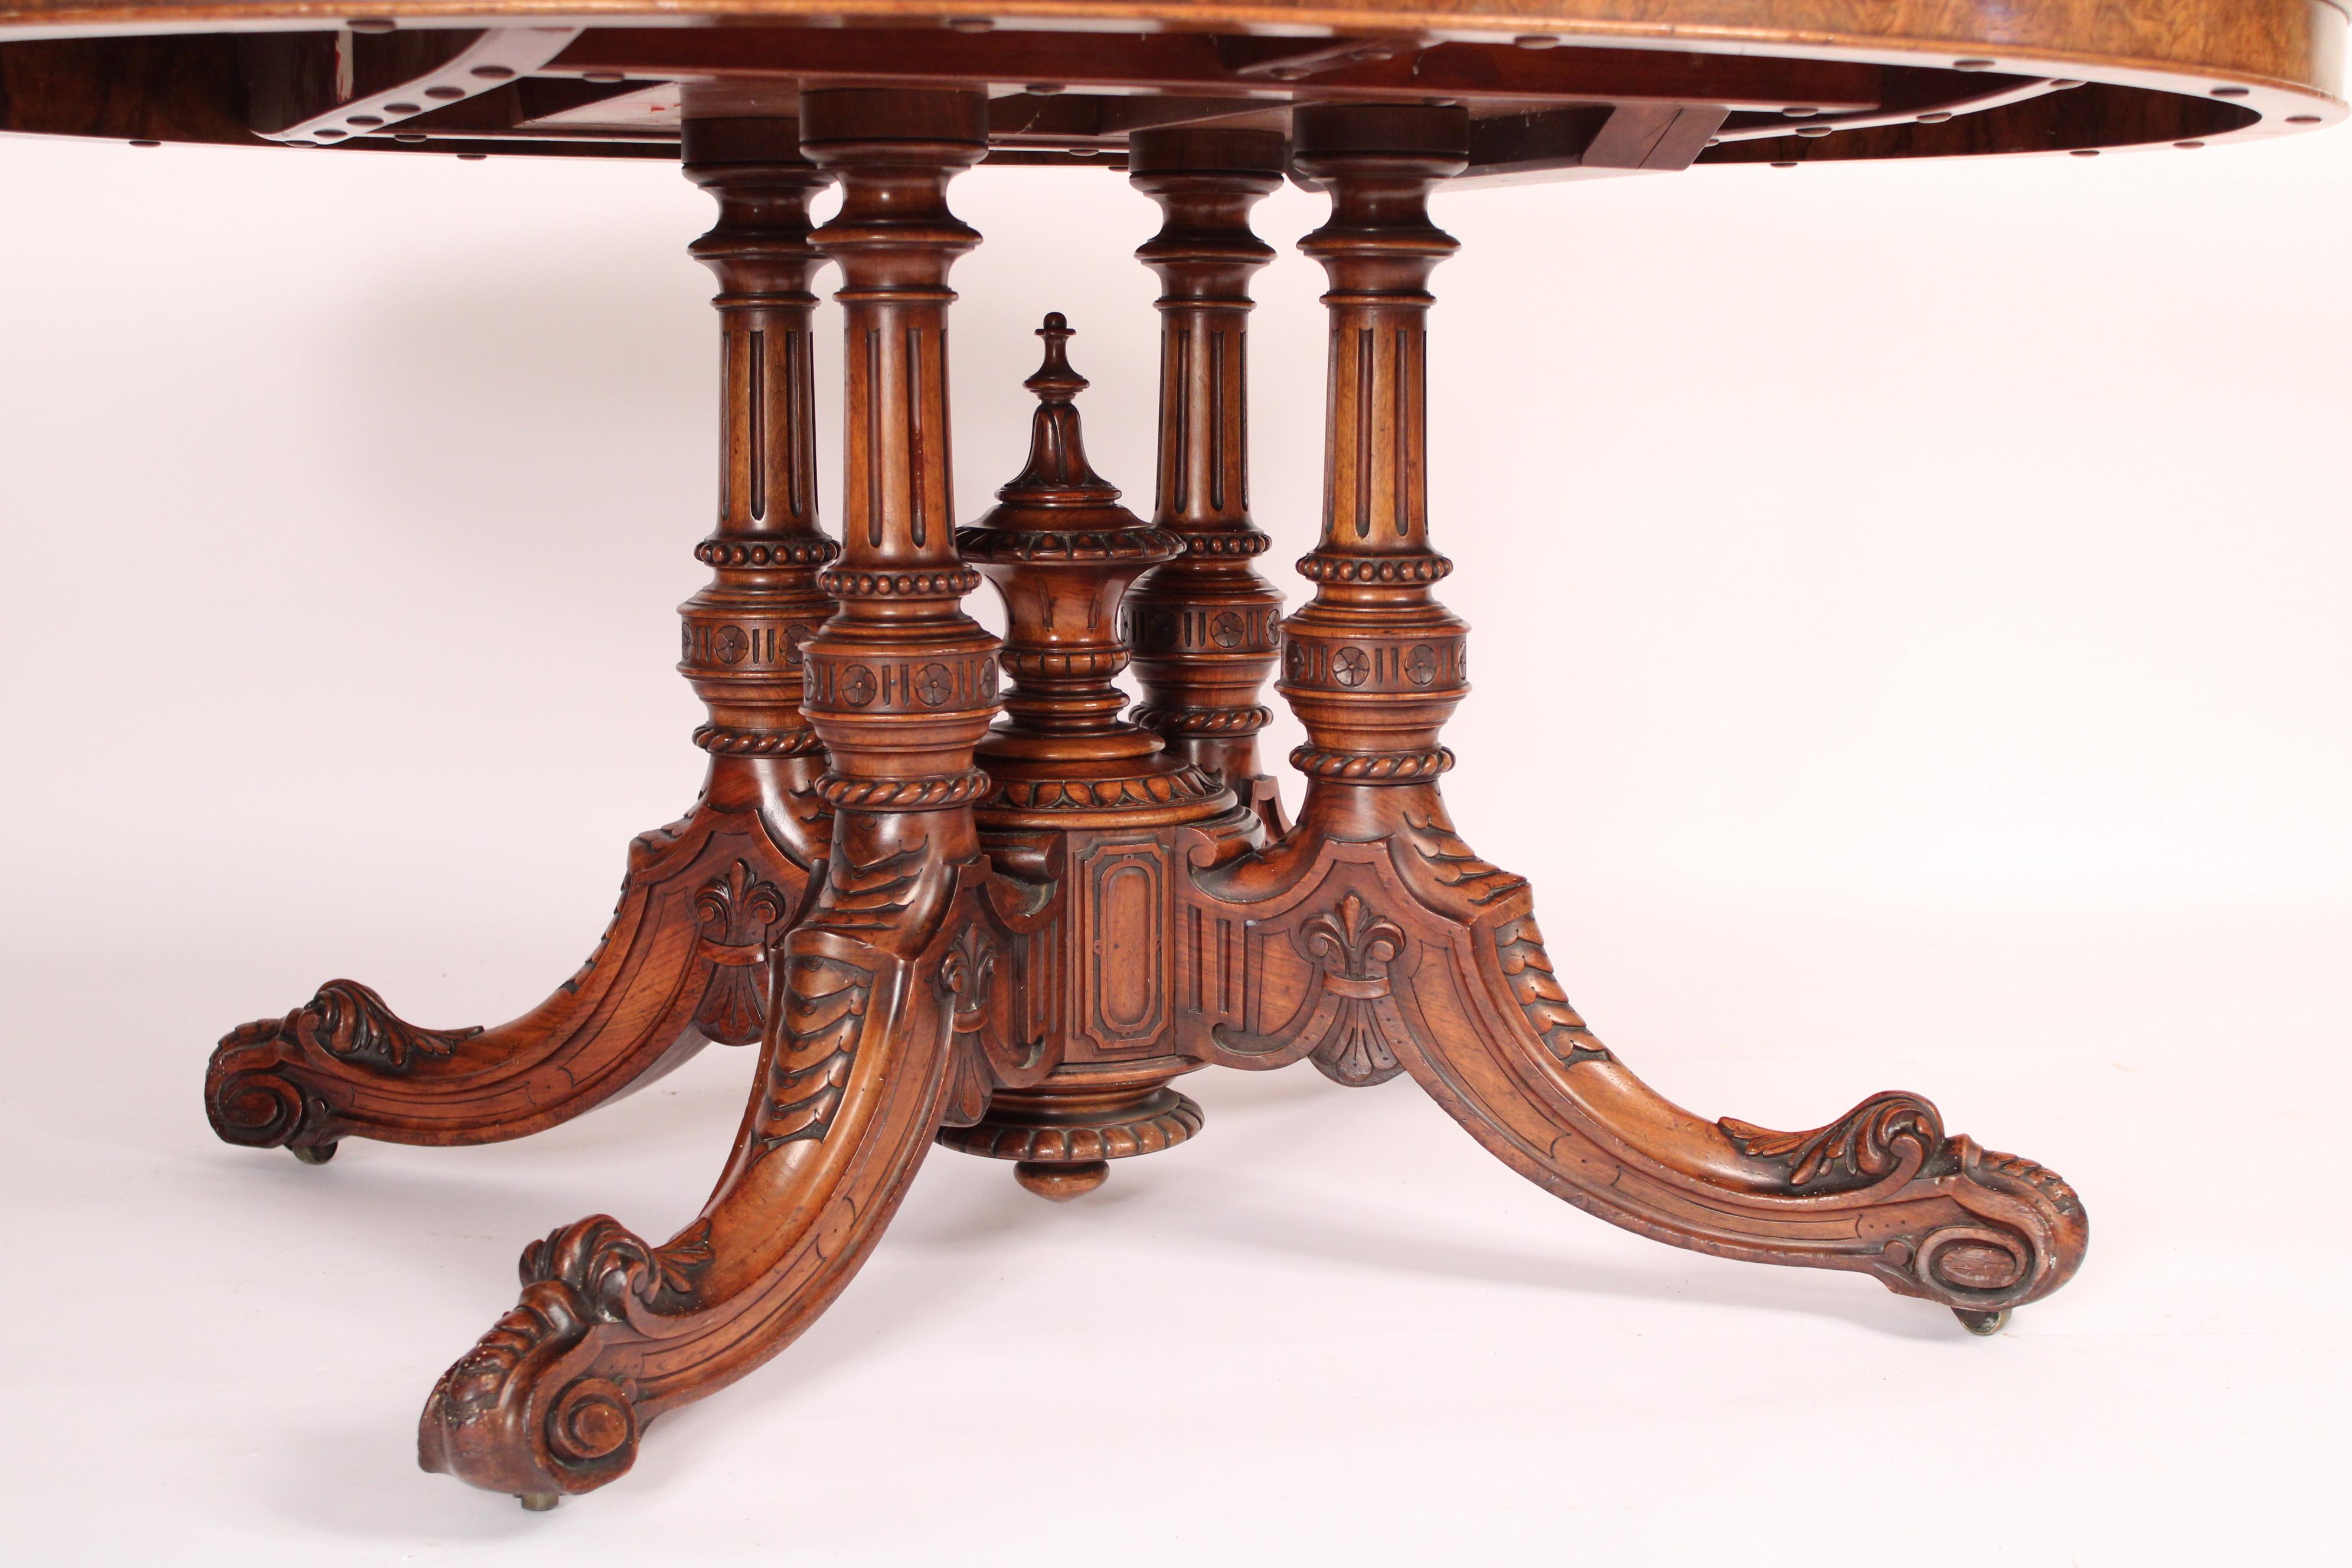 English Victorian Loo Table Made by Hewetson & Milner